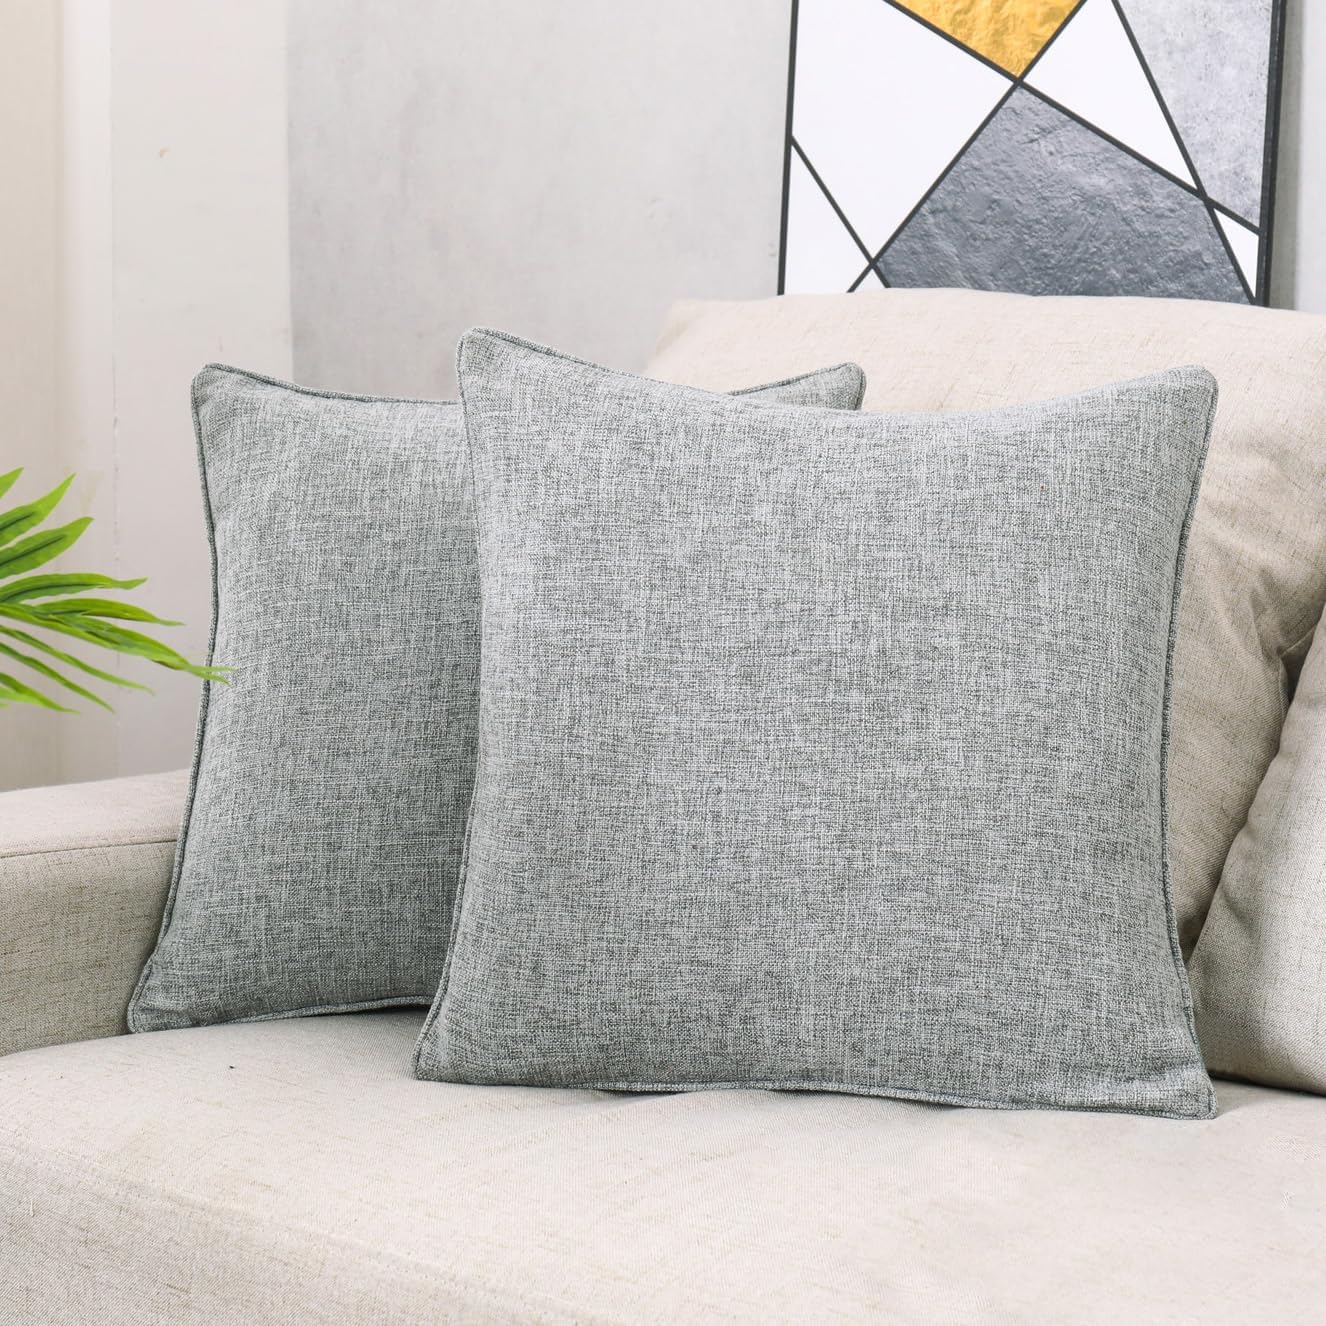 HPUK Linen Throw Pillow Covers Pack of 2, 18x18 Inch Accent Cushion Covers for Living Room, Bedroom, Decorative Solid Color Pillow Covers for Couch, Sofa, Chair, Grey